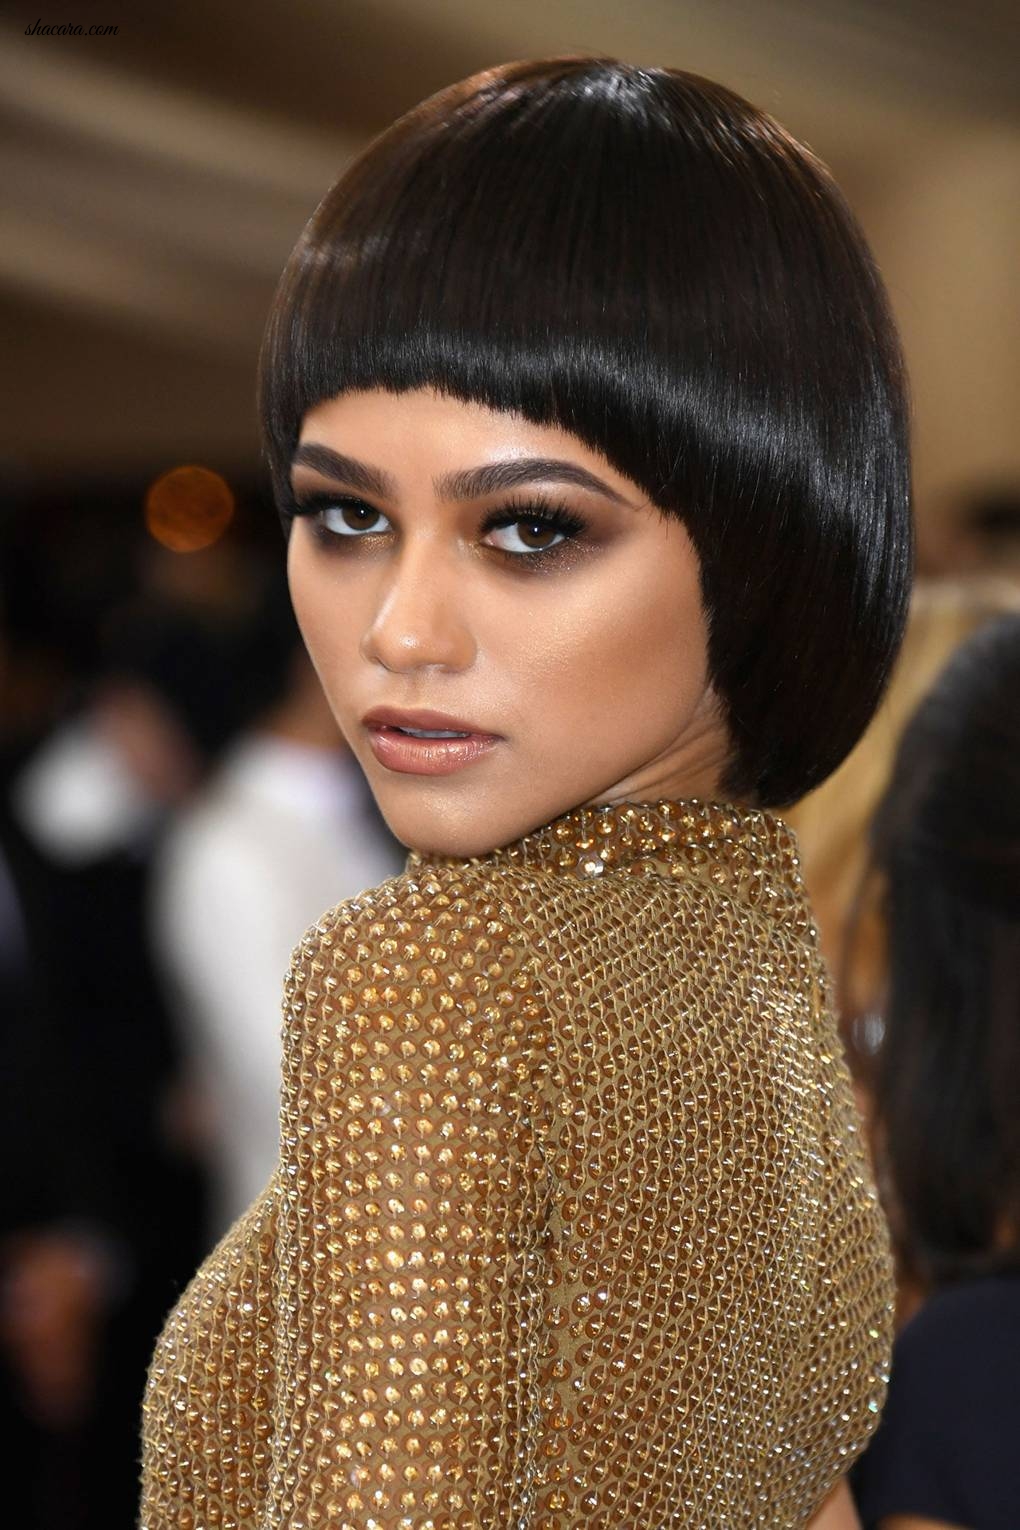 28 Iconic Bobs That Will Inspire You To Go For The Chop